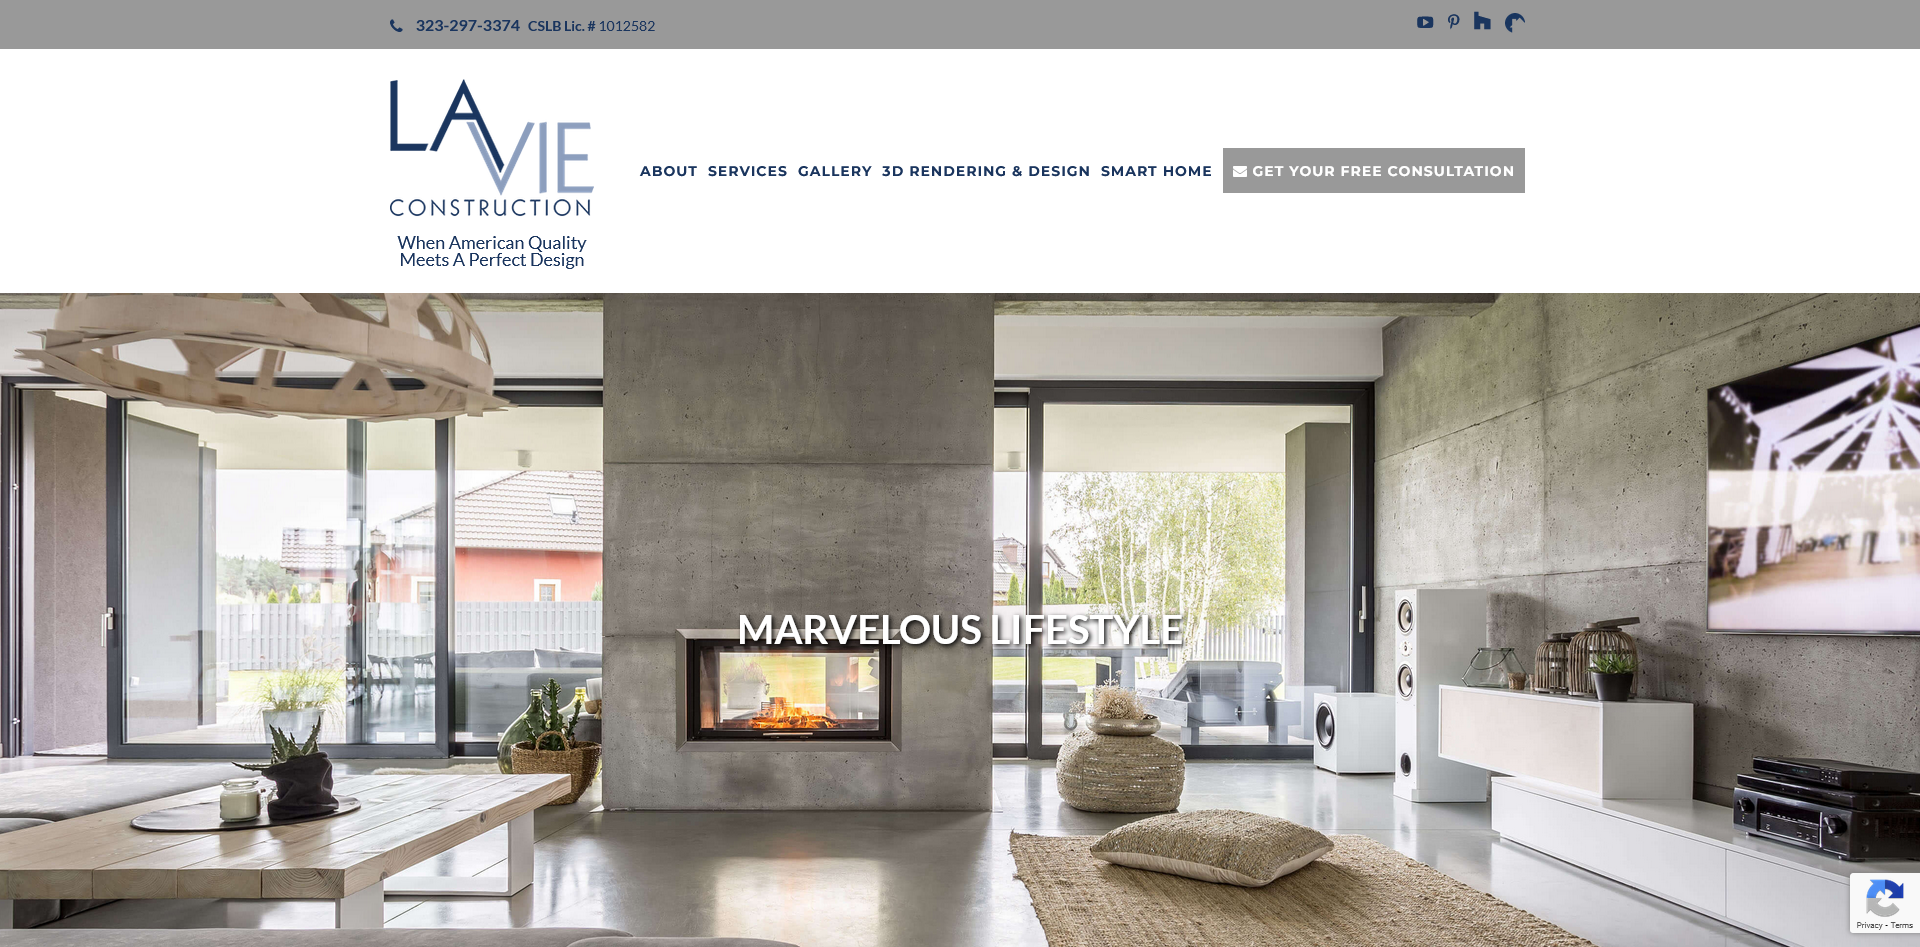 Lavie Construction – When American Quality Meets A Perfect Design